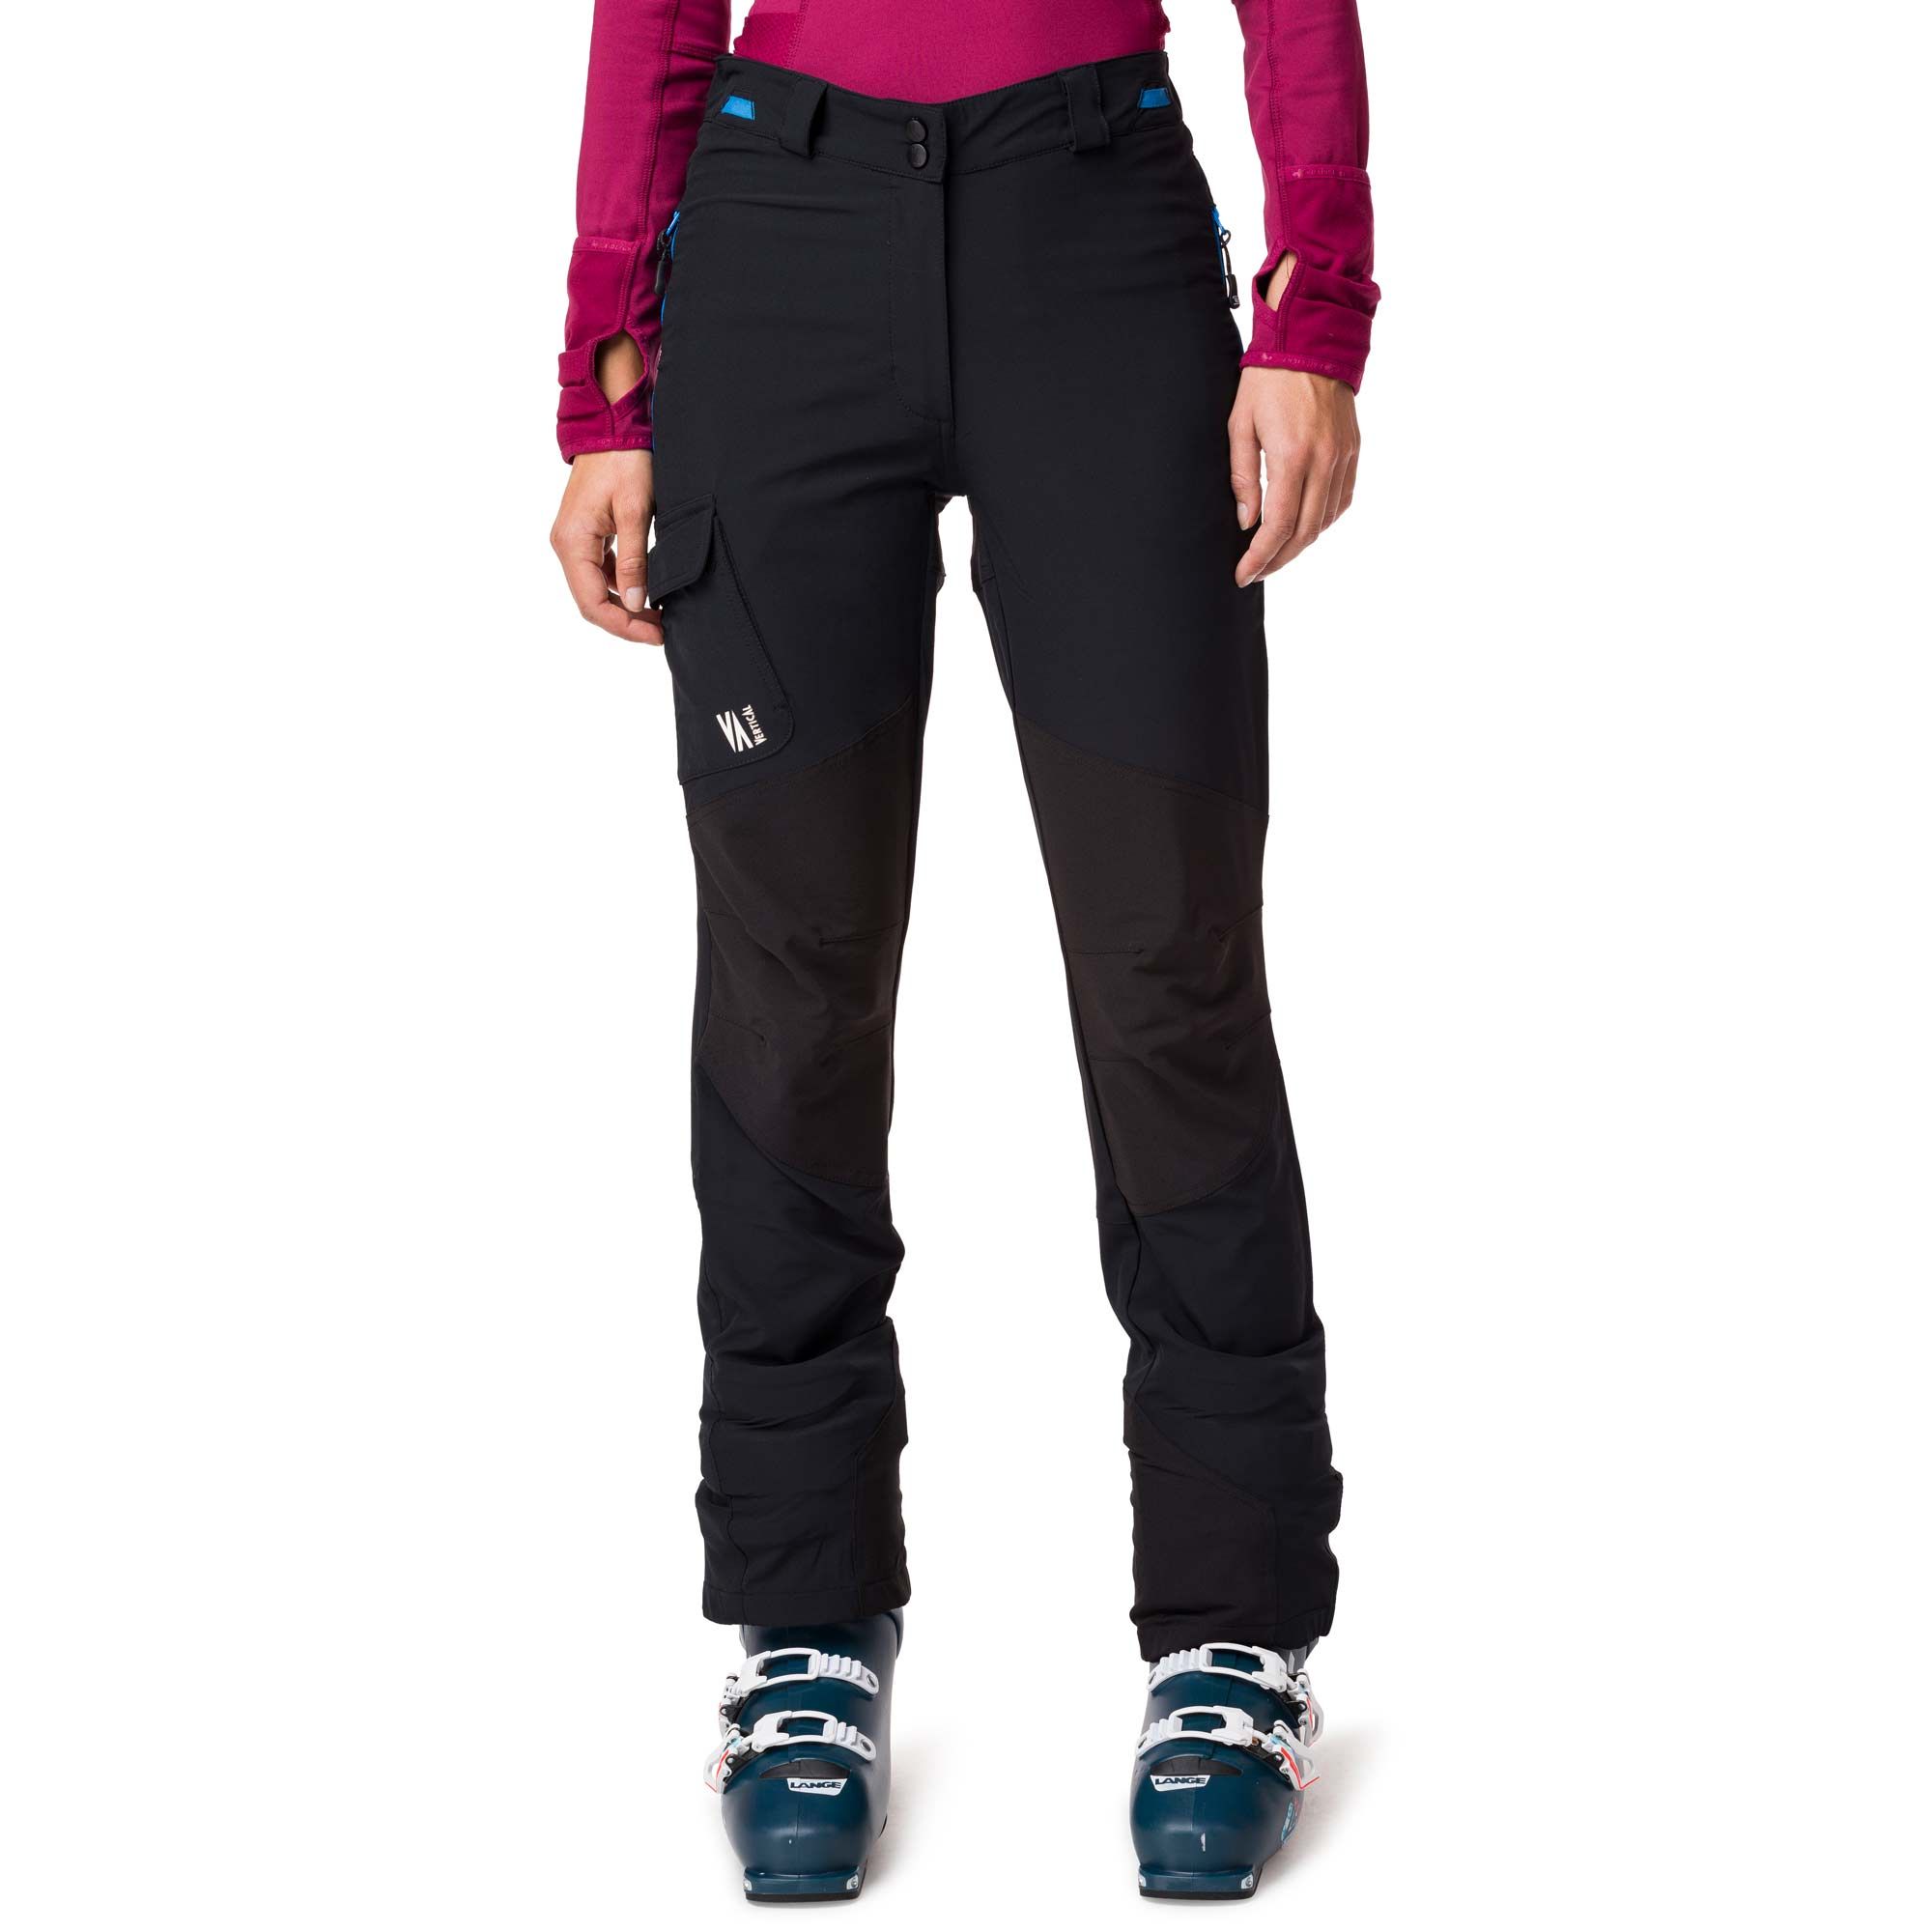 Vertical Fissure Pant W - Touring pants - Women's